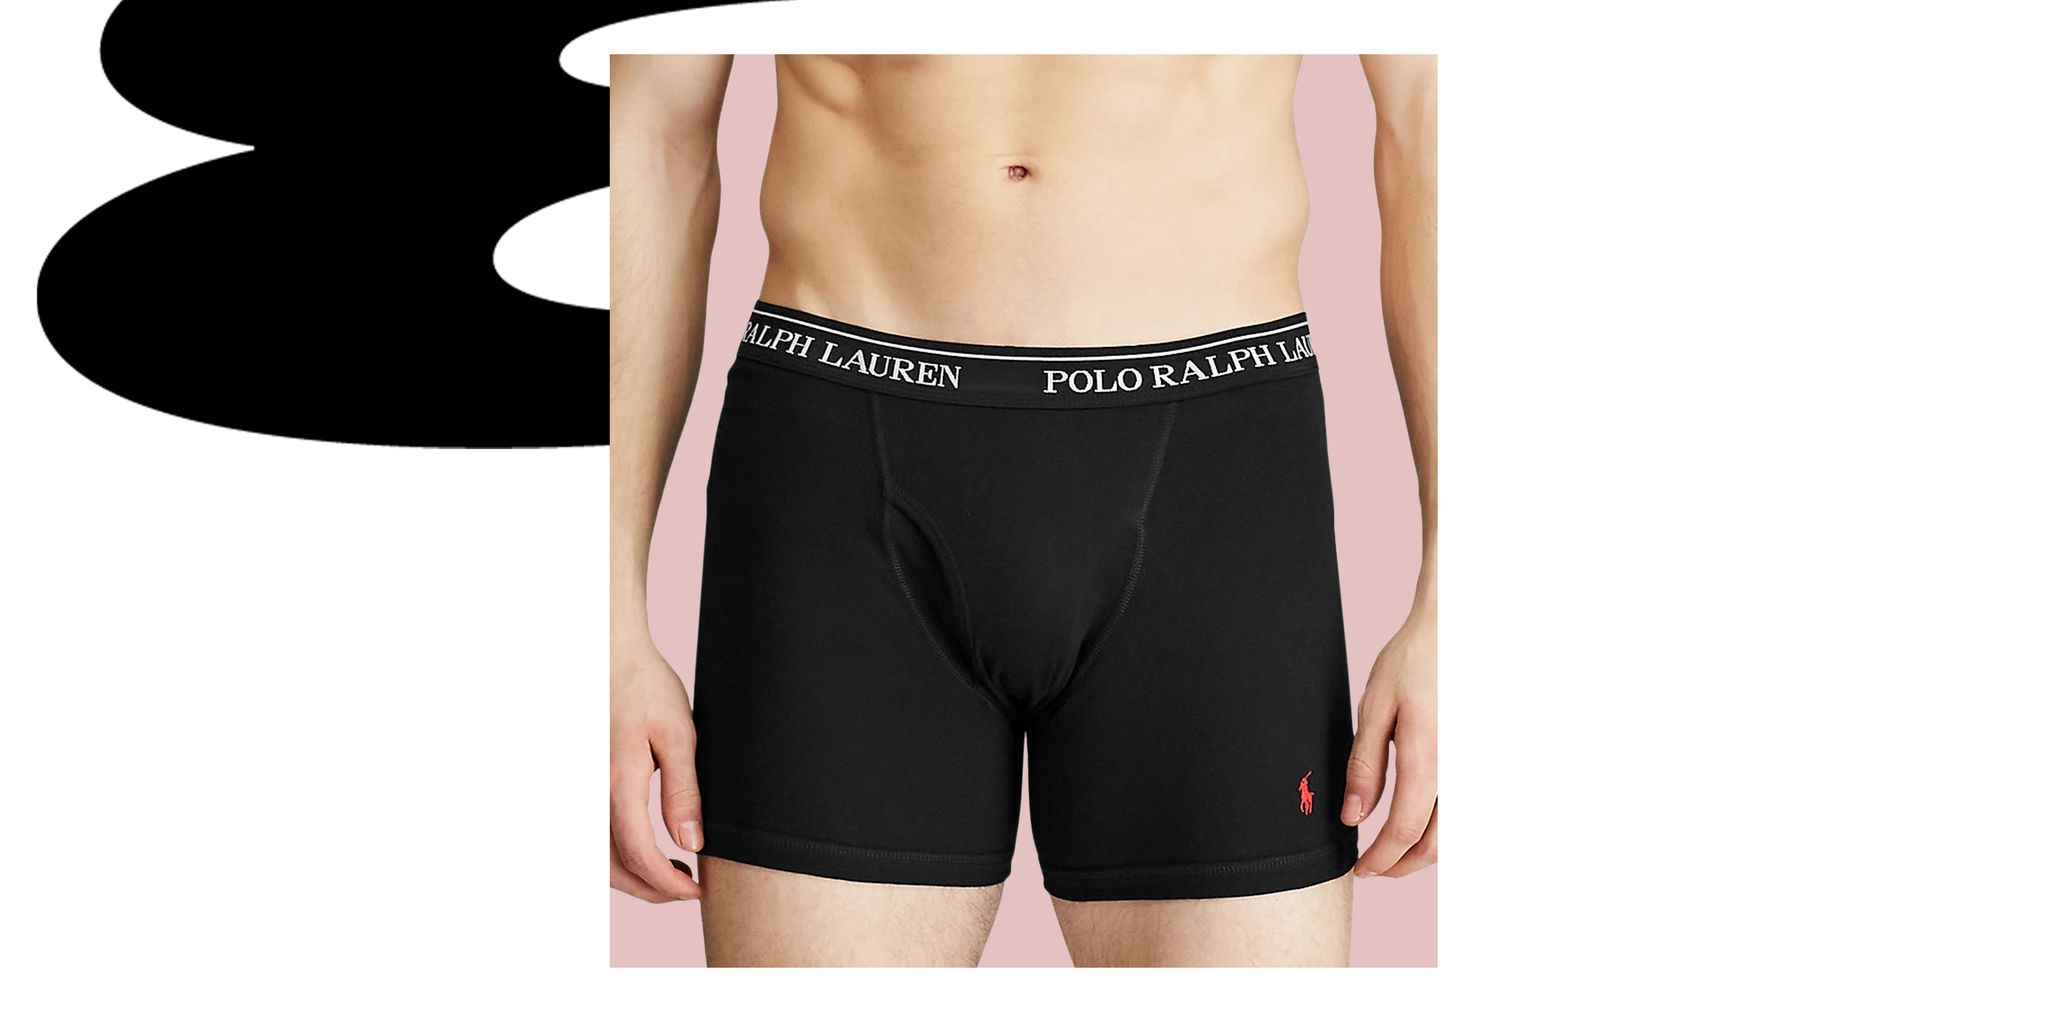 Buy Plain Trunk for Mens - 100% Cotton Brief - Underwear Available in Red  Color & in Size L Online at Low Prices in India 